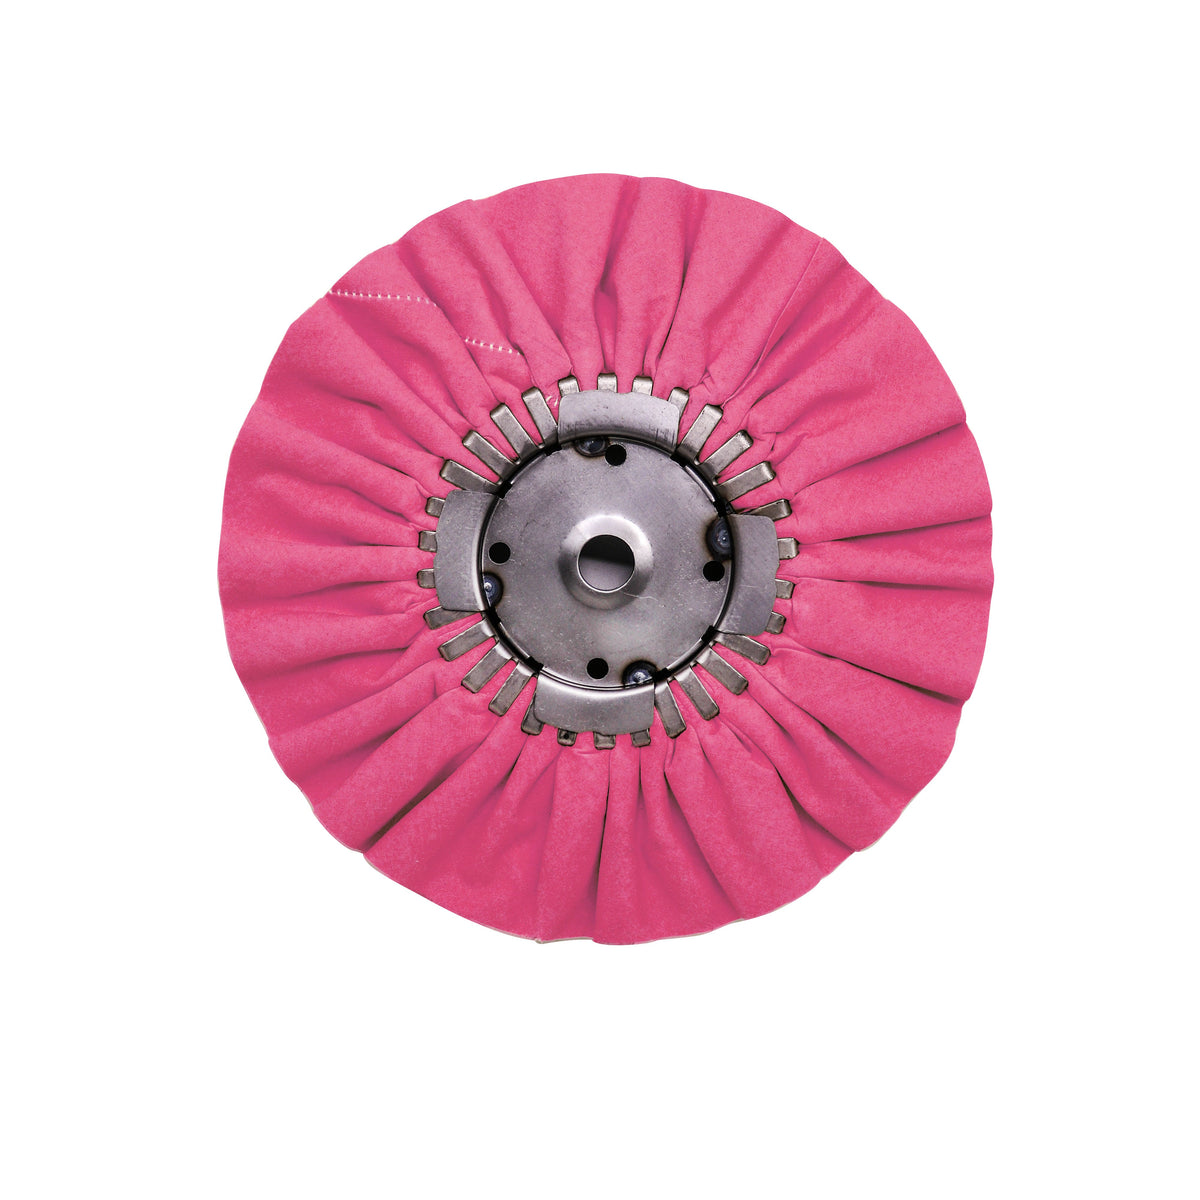 Renegade Products USA Pink Airway Buffing Wheel with Center Plate - Professional Buffing Tool for Precise Polishing and Finishing